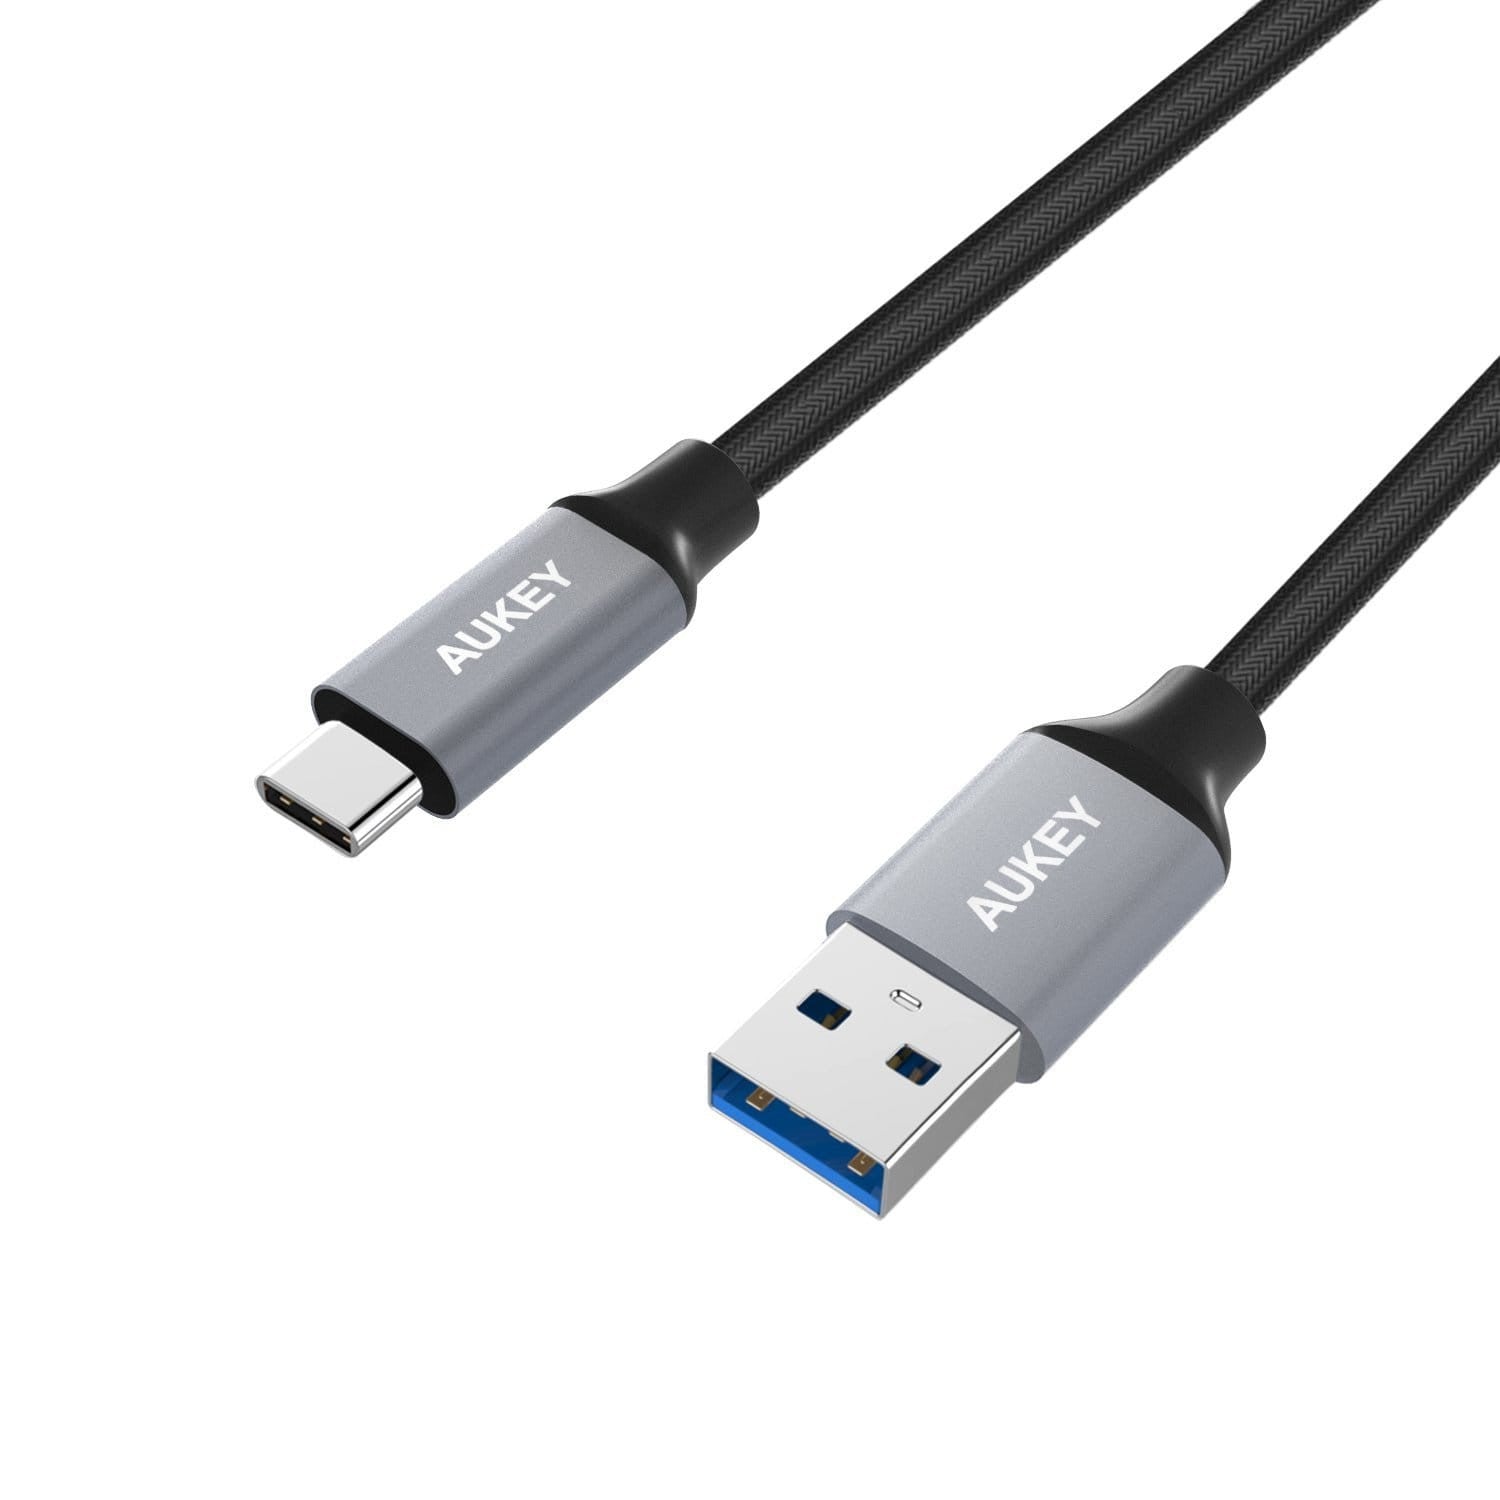 AUKEY CB-CD2 1m USB-C to USB 3.0 Quick Charge 3.0 High Performance Nylon Braided Cable - Aukey Malaysia Official Store